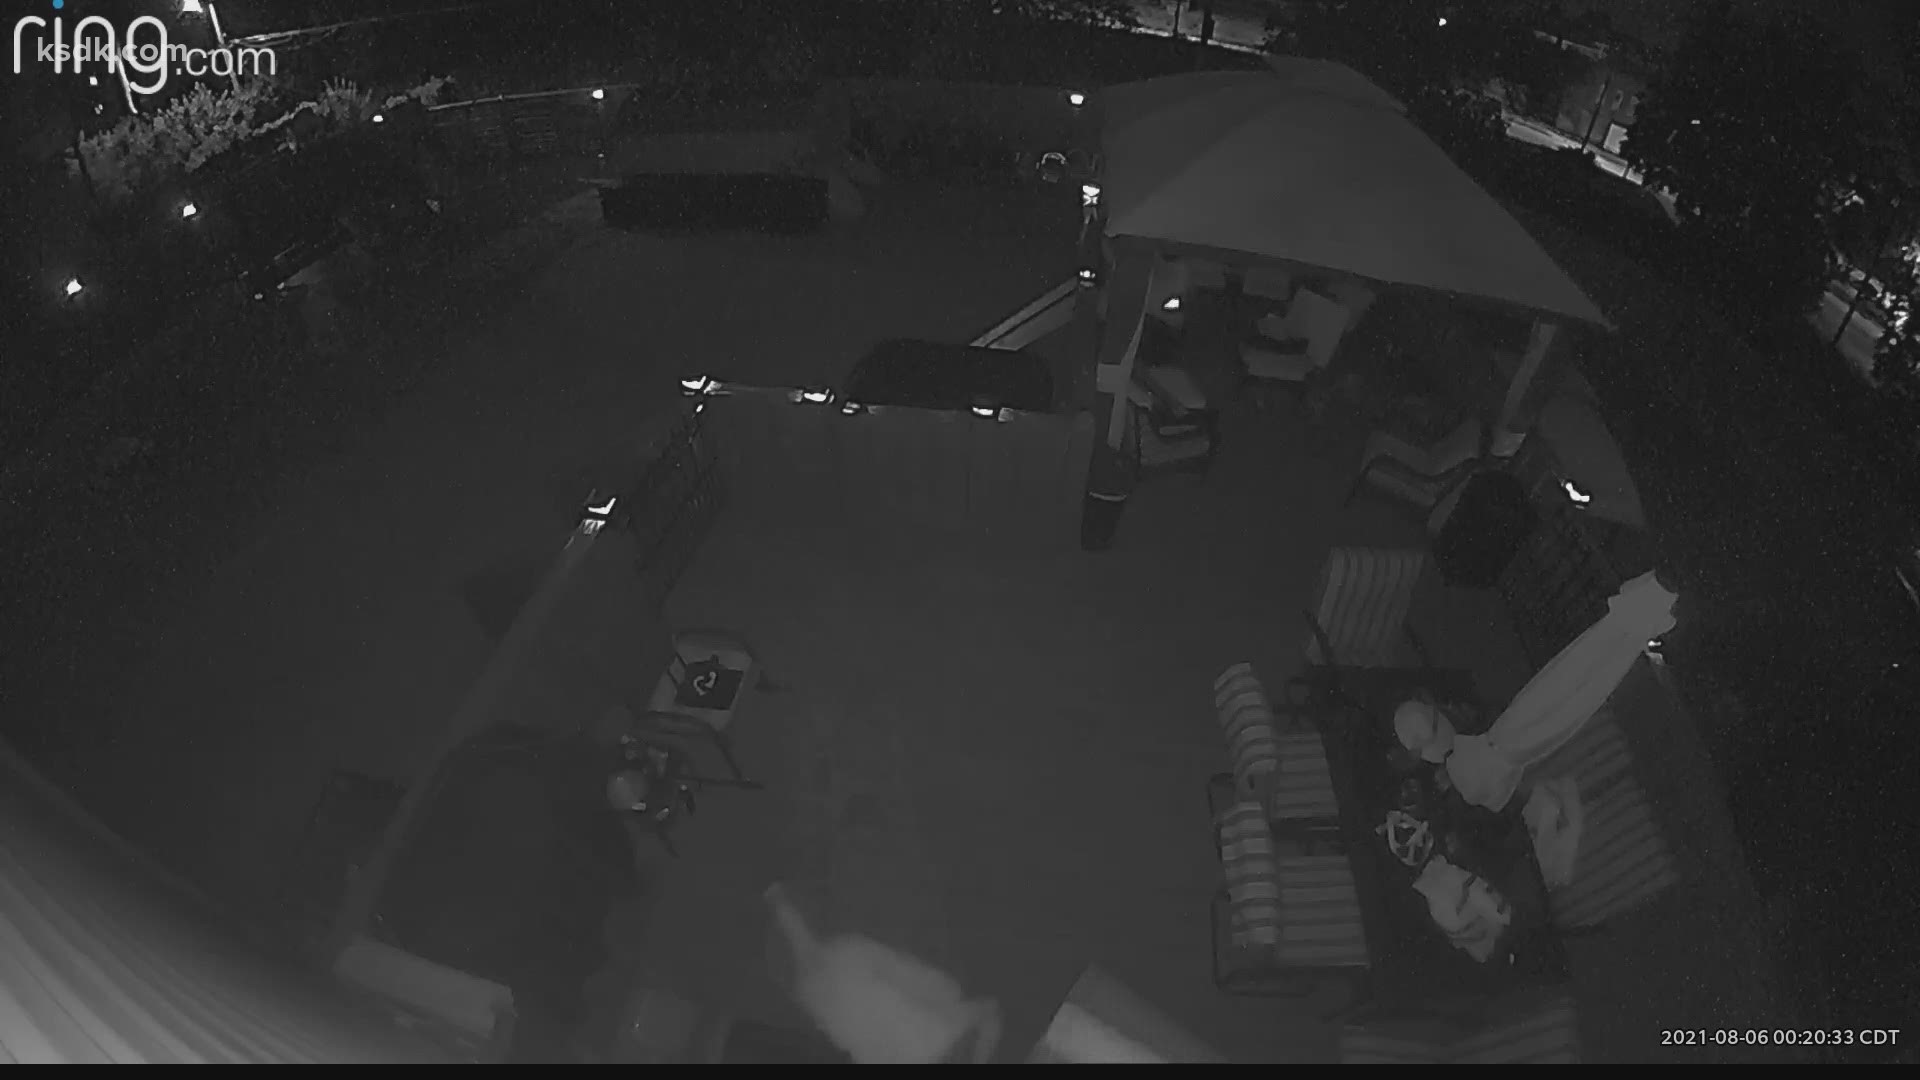 One woman sent video to her alderman showing rounds of gunfire at all hours of the night.